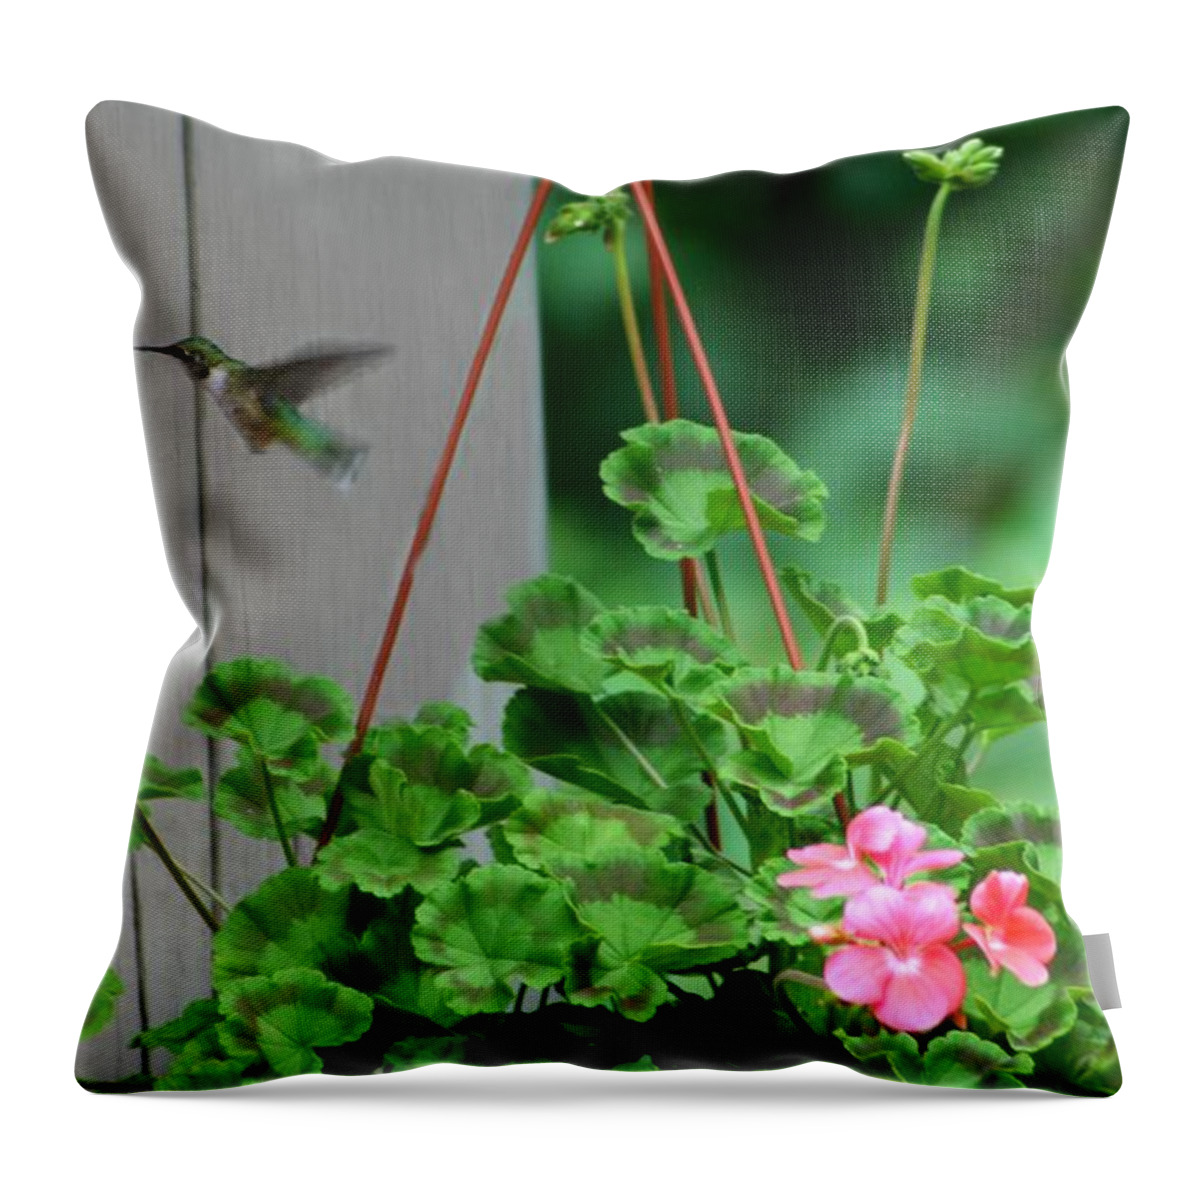 Macro Throw Pillow featuring the photograph Hovering by Barbara S Nickerson